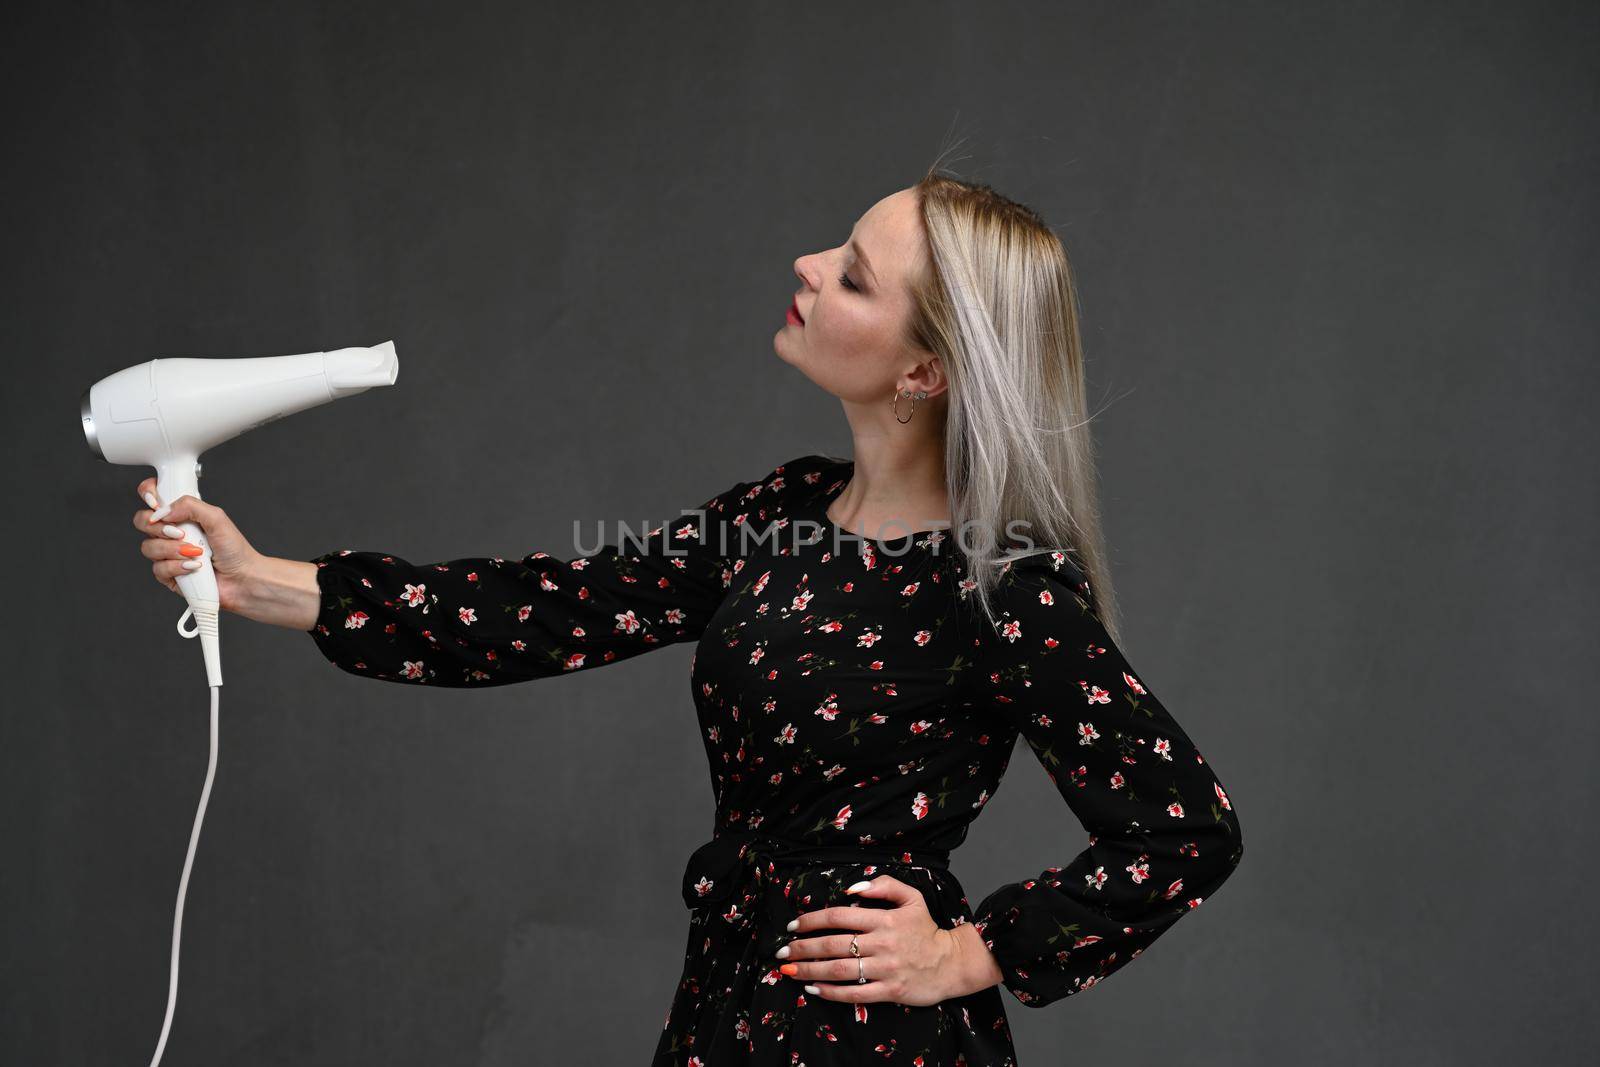 beautiful blondy girl blowing her hair with hairdryer, screaming - isolated on gray